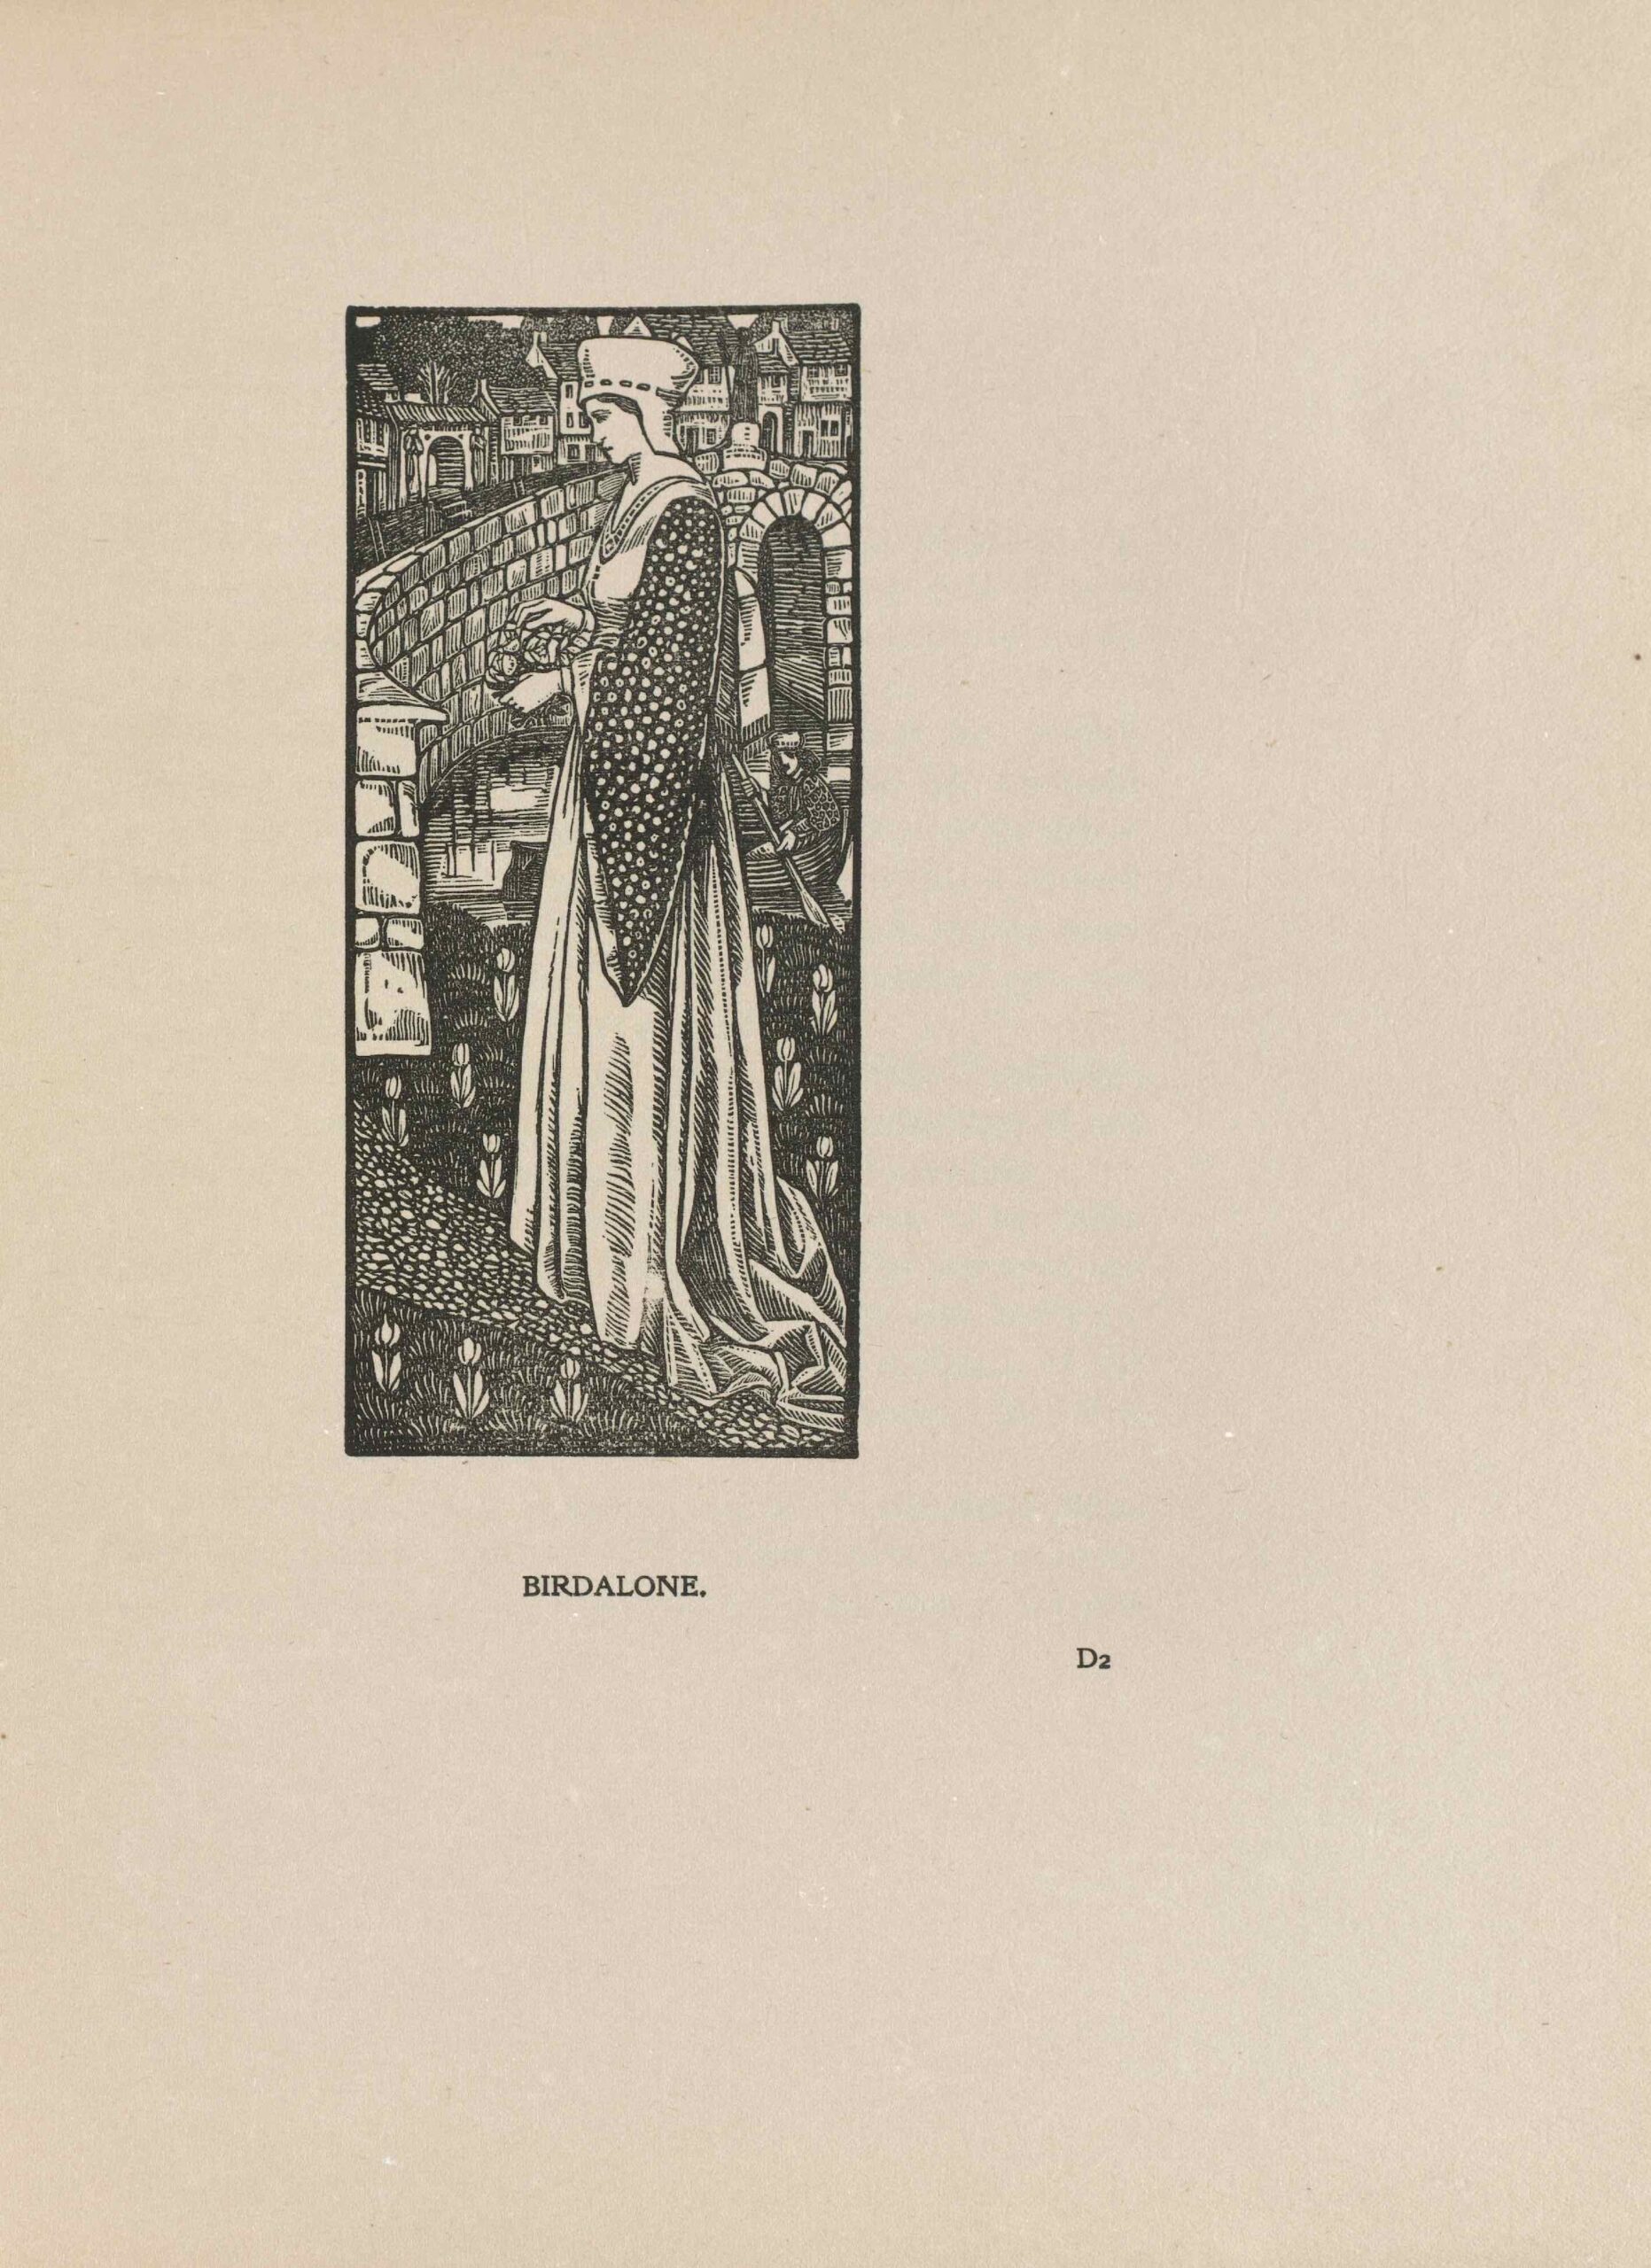 The image is in portrait orientation and is centered in the upper region of the page. In the foreground, a tall adult woman on a stone pathway. Only her left side-profile is visible. The woman is holding three flowers with short stems in her hands and is looking downwards towards them. She is wearing a white head garment and a long gown which trails behind her. The gown is lightly coloured and is decorated with spotted dark long sleeves. The woman is standing on a pathway which is surrounded by a garden of neatly trimmed grass and small flowers. In the background, a stone bridge curves from the left side of the image to the right, leading over a small stream towards a street of trees and buildings in the far distance. Beneath the bridge there is a man on a small paddle-boat. He is wearing a small hat and a speckled robe. The man is holding a wooden paddle and is looking in the direction of the woman in the foreground. The image is printed in black ink.